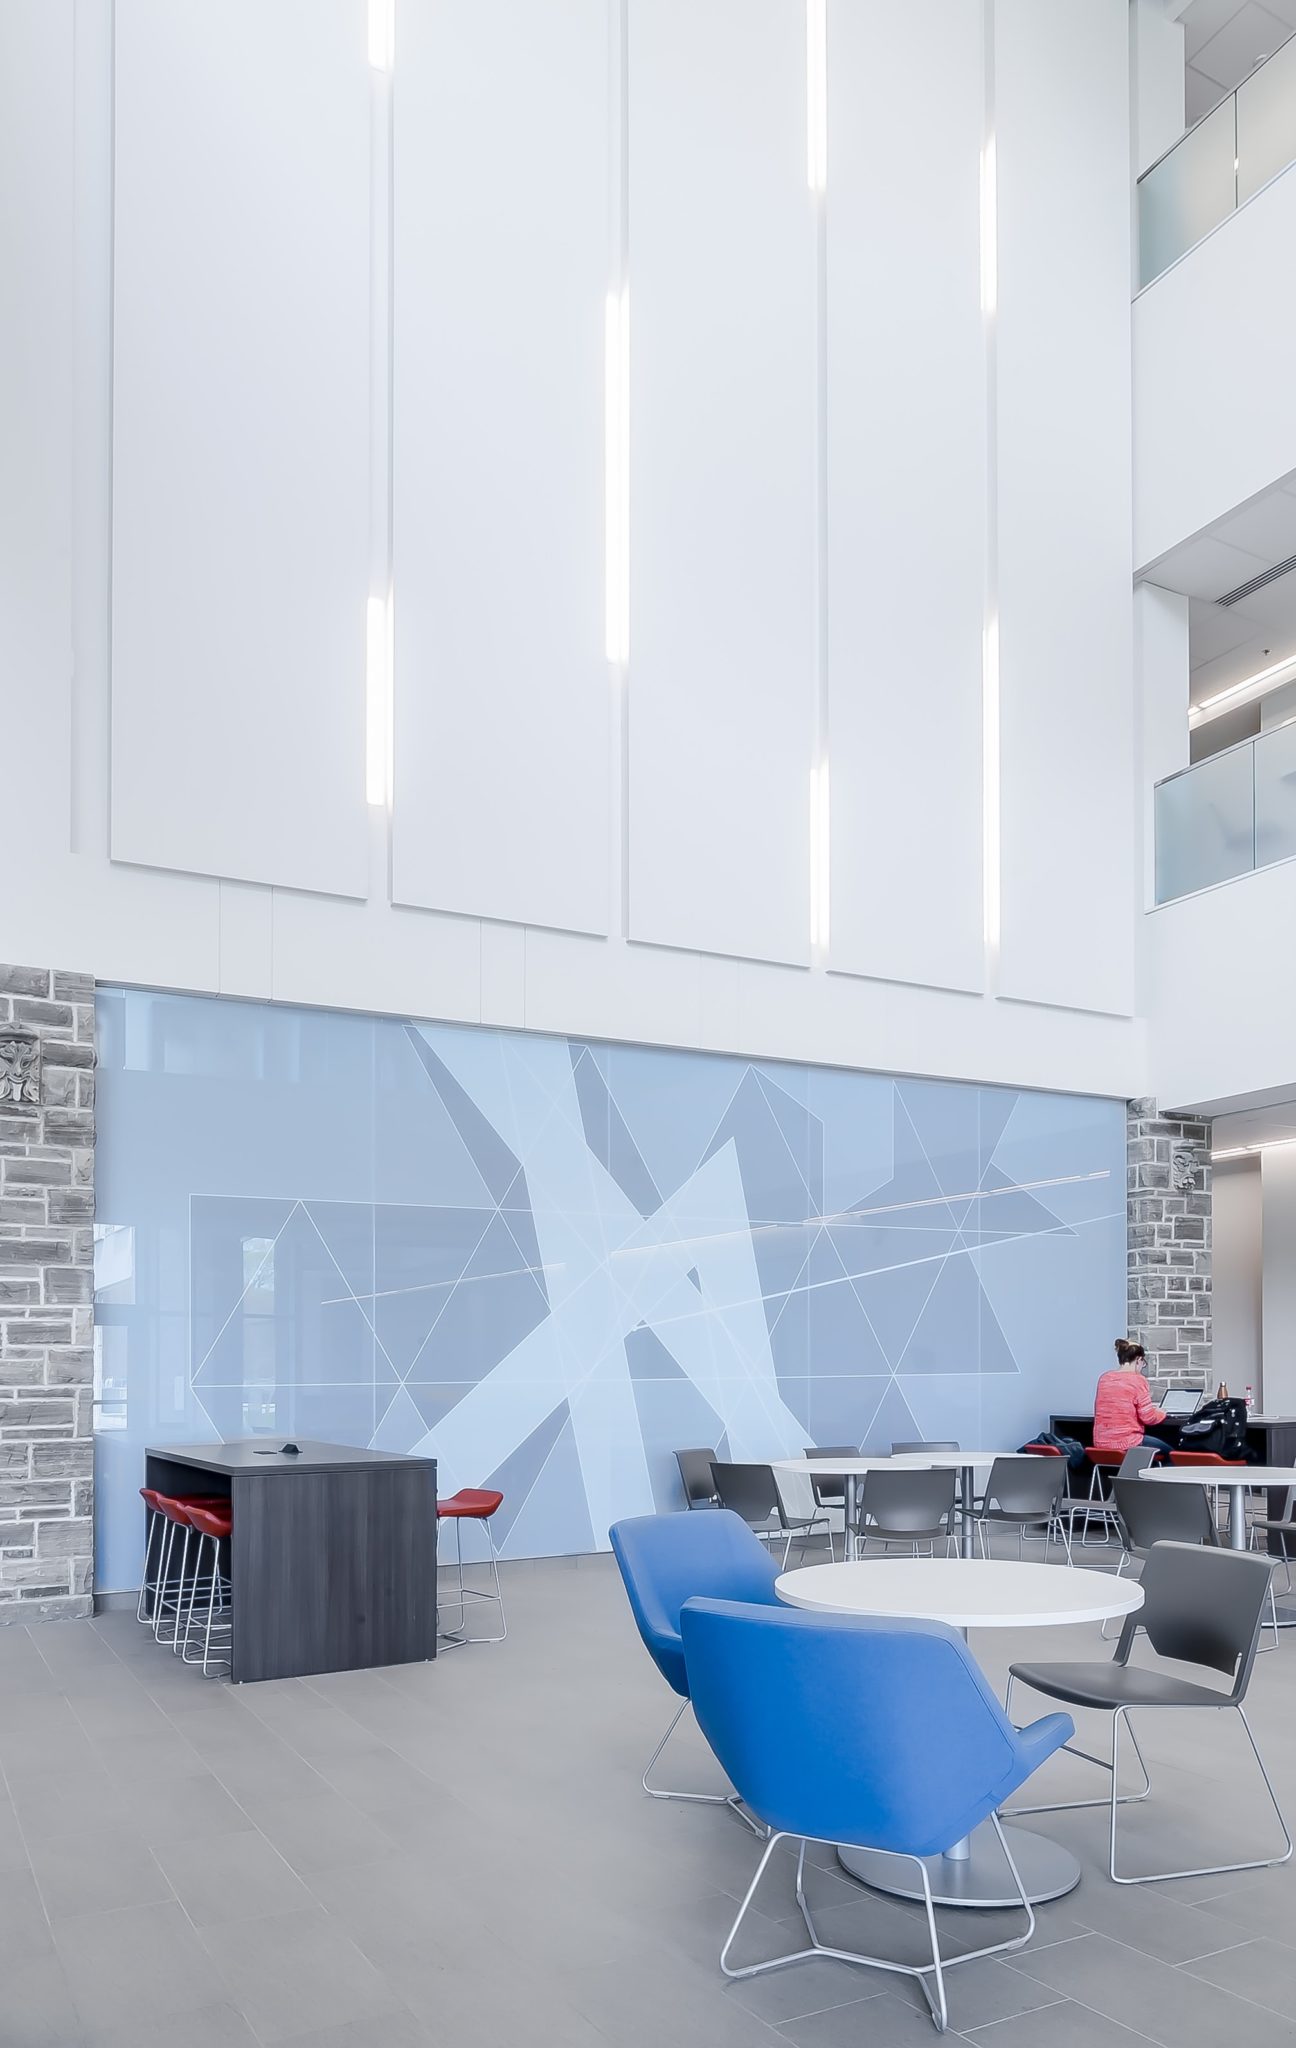 An image of an modern office envrionment where a foreign exchange program candidate may work in Canada